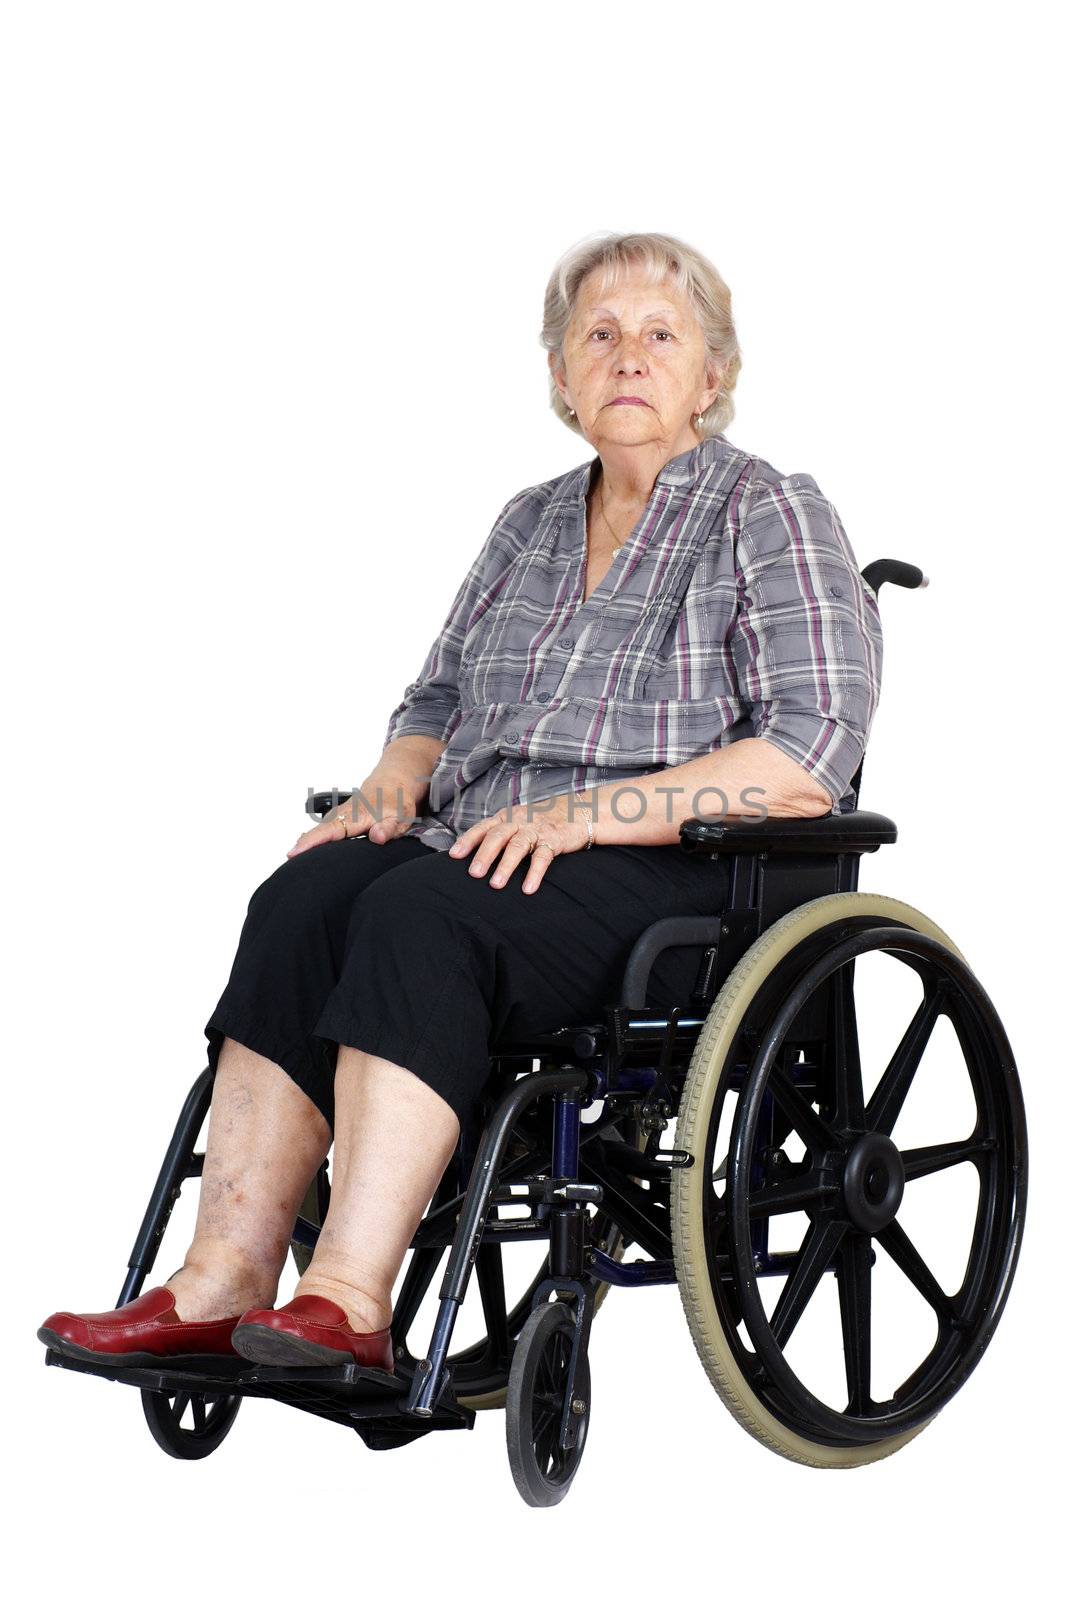 Sad or depressed senior woman in a wheelchair, looking down, studio shot isolated over white background.